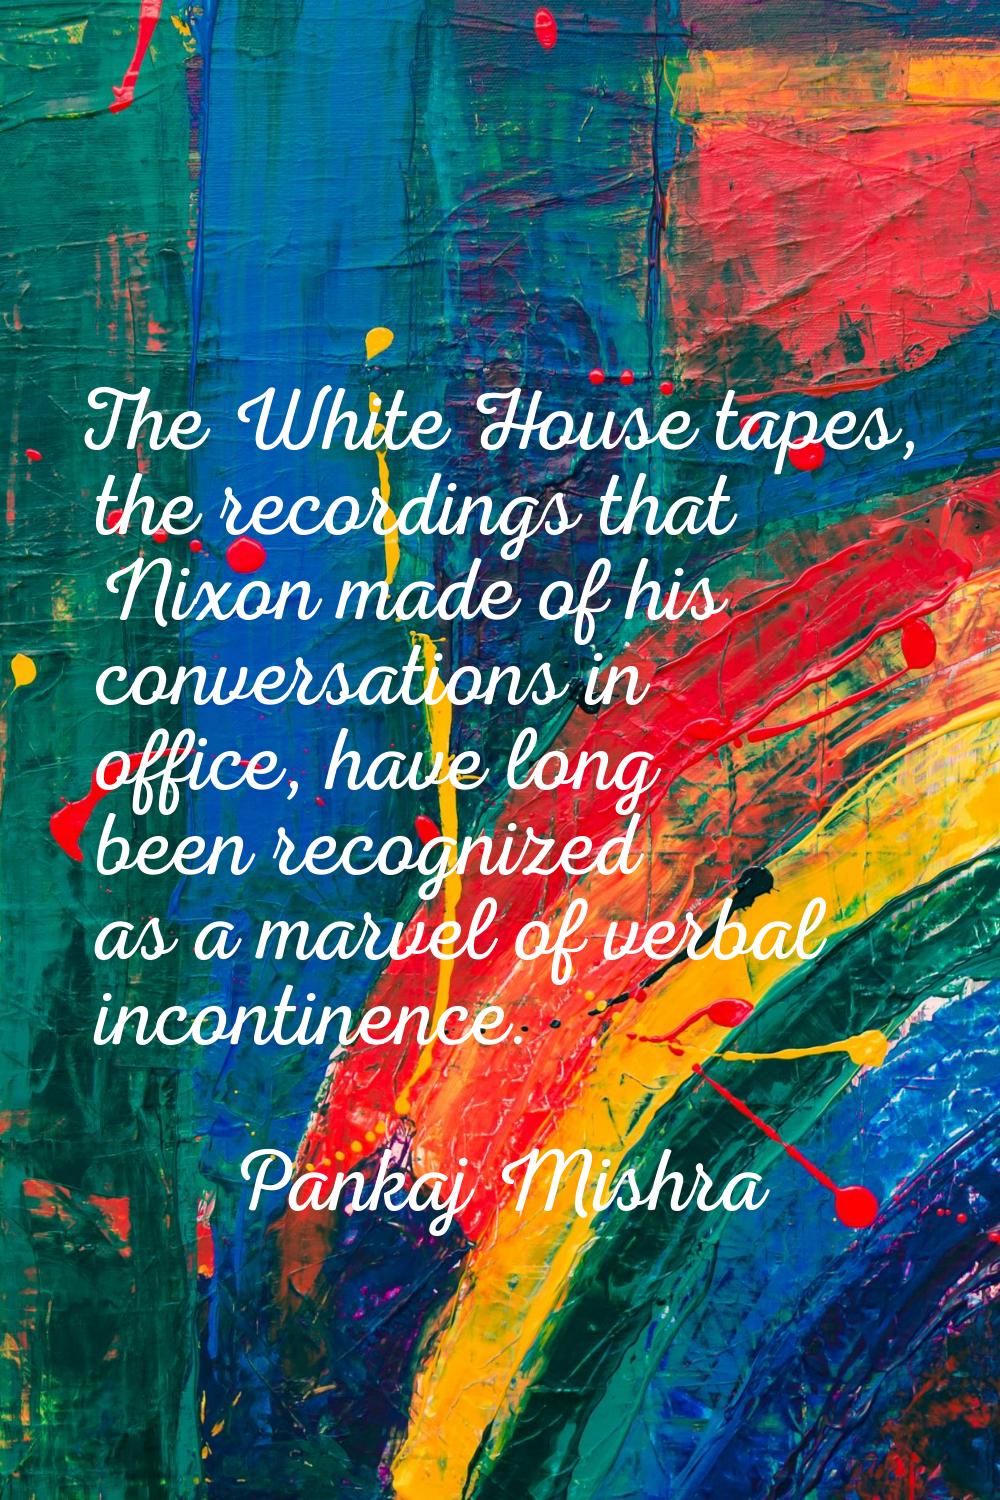 The White House tapes, the recordings that Nixon made of his conversations in office, have long bee